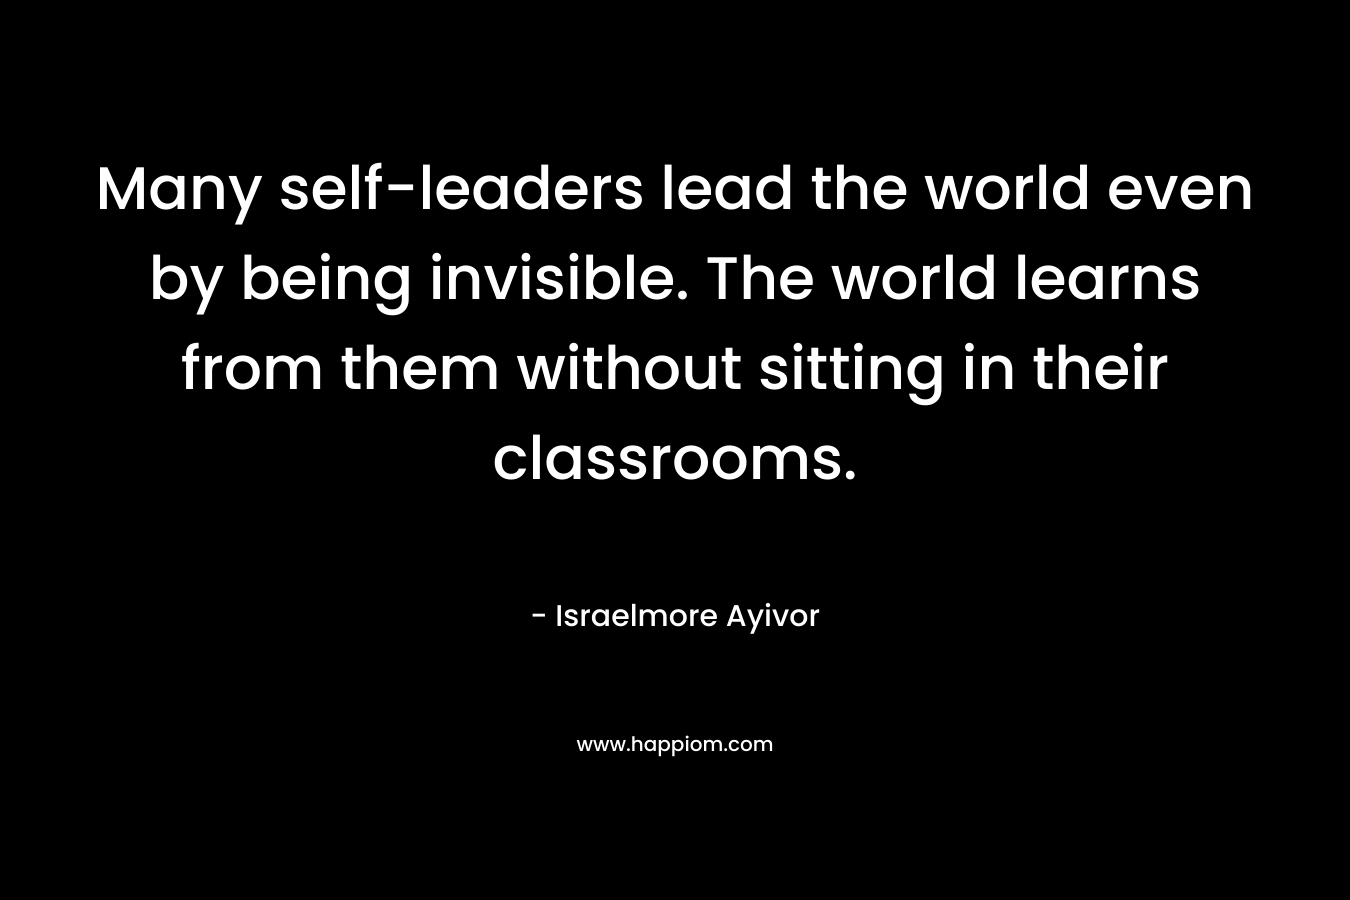 Many self-leaders lead the world even by being invisible. The world learns from them without sitting in their classrooms.